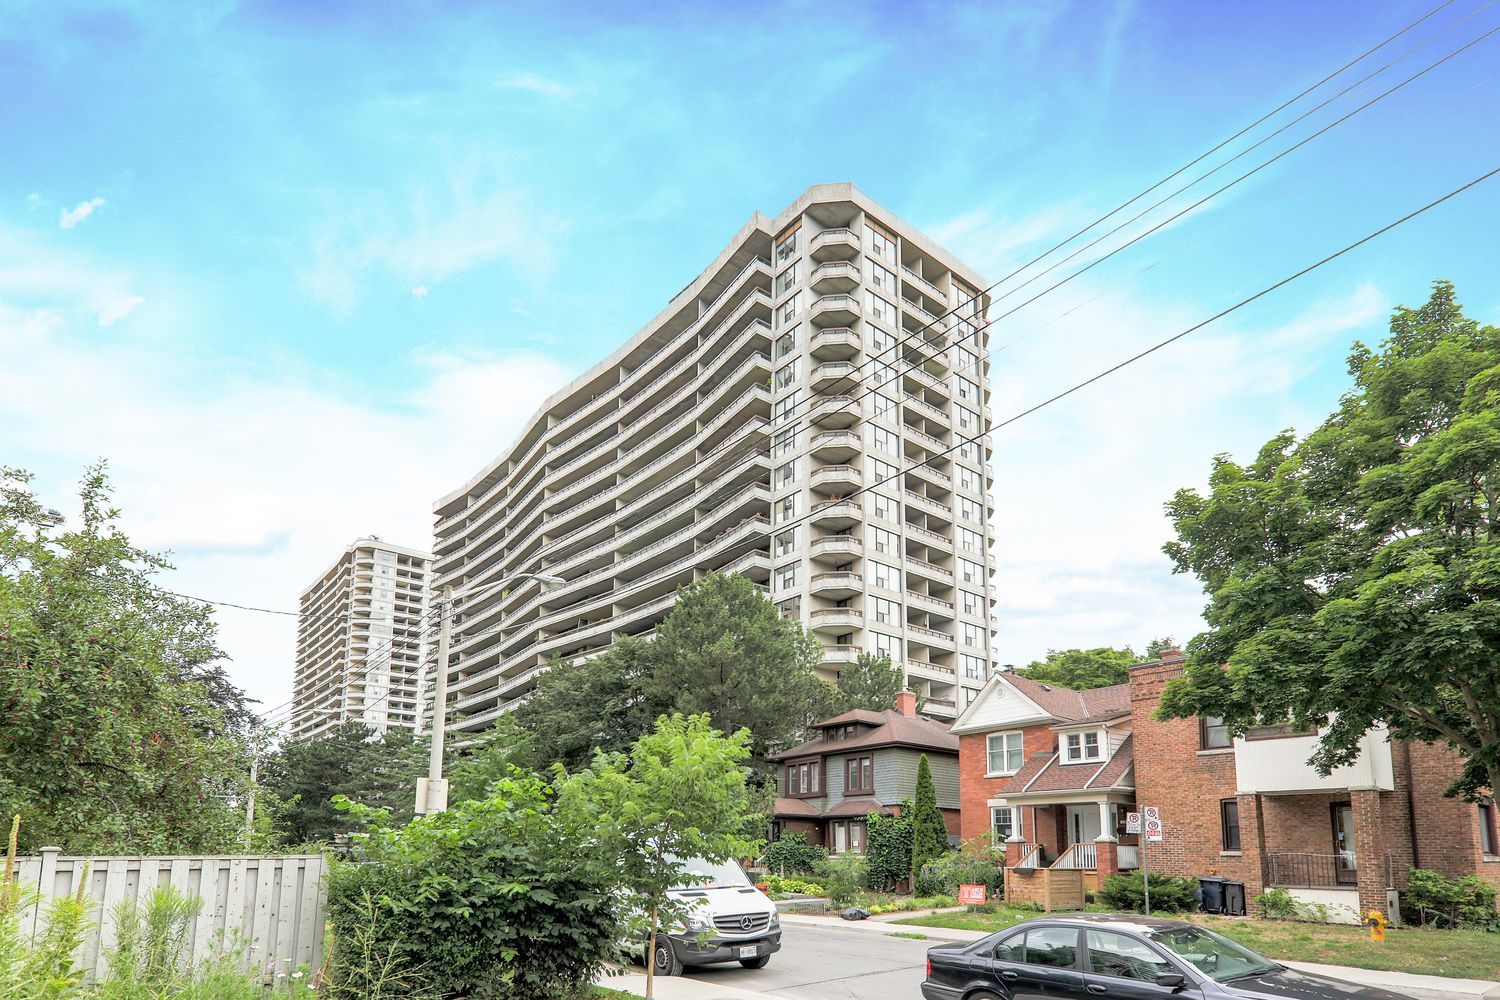 50 Quebec Avenue. High Park Green is located in  West End, Toronto - image #1 of 5